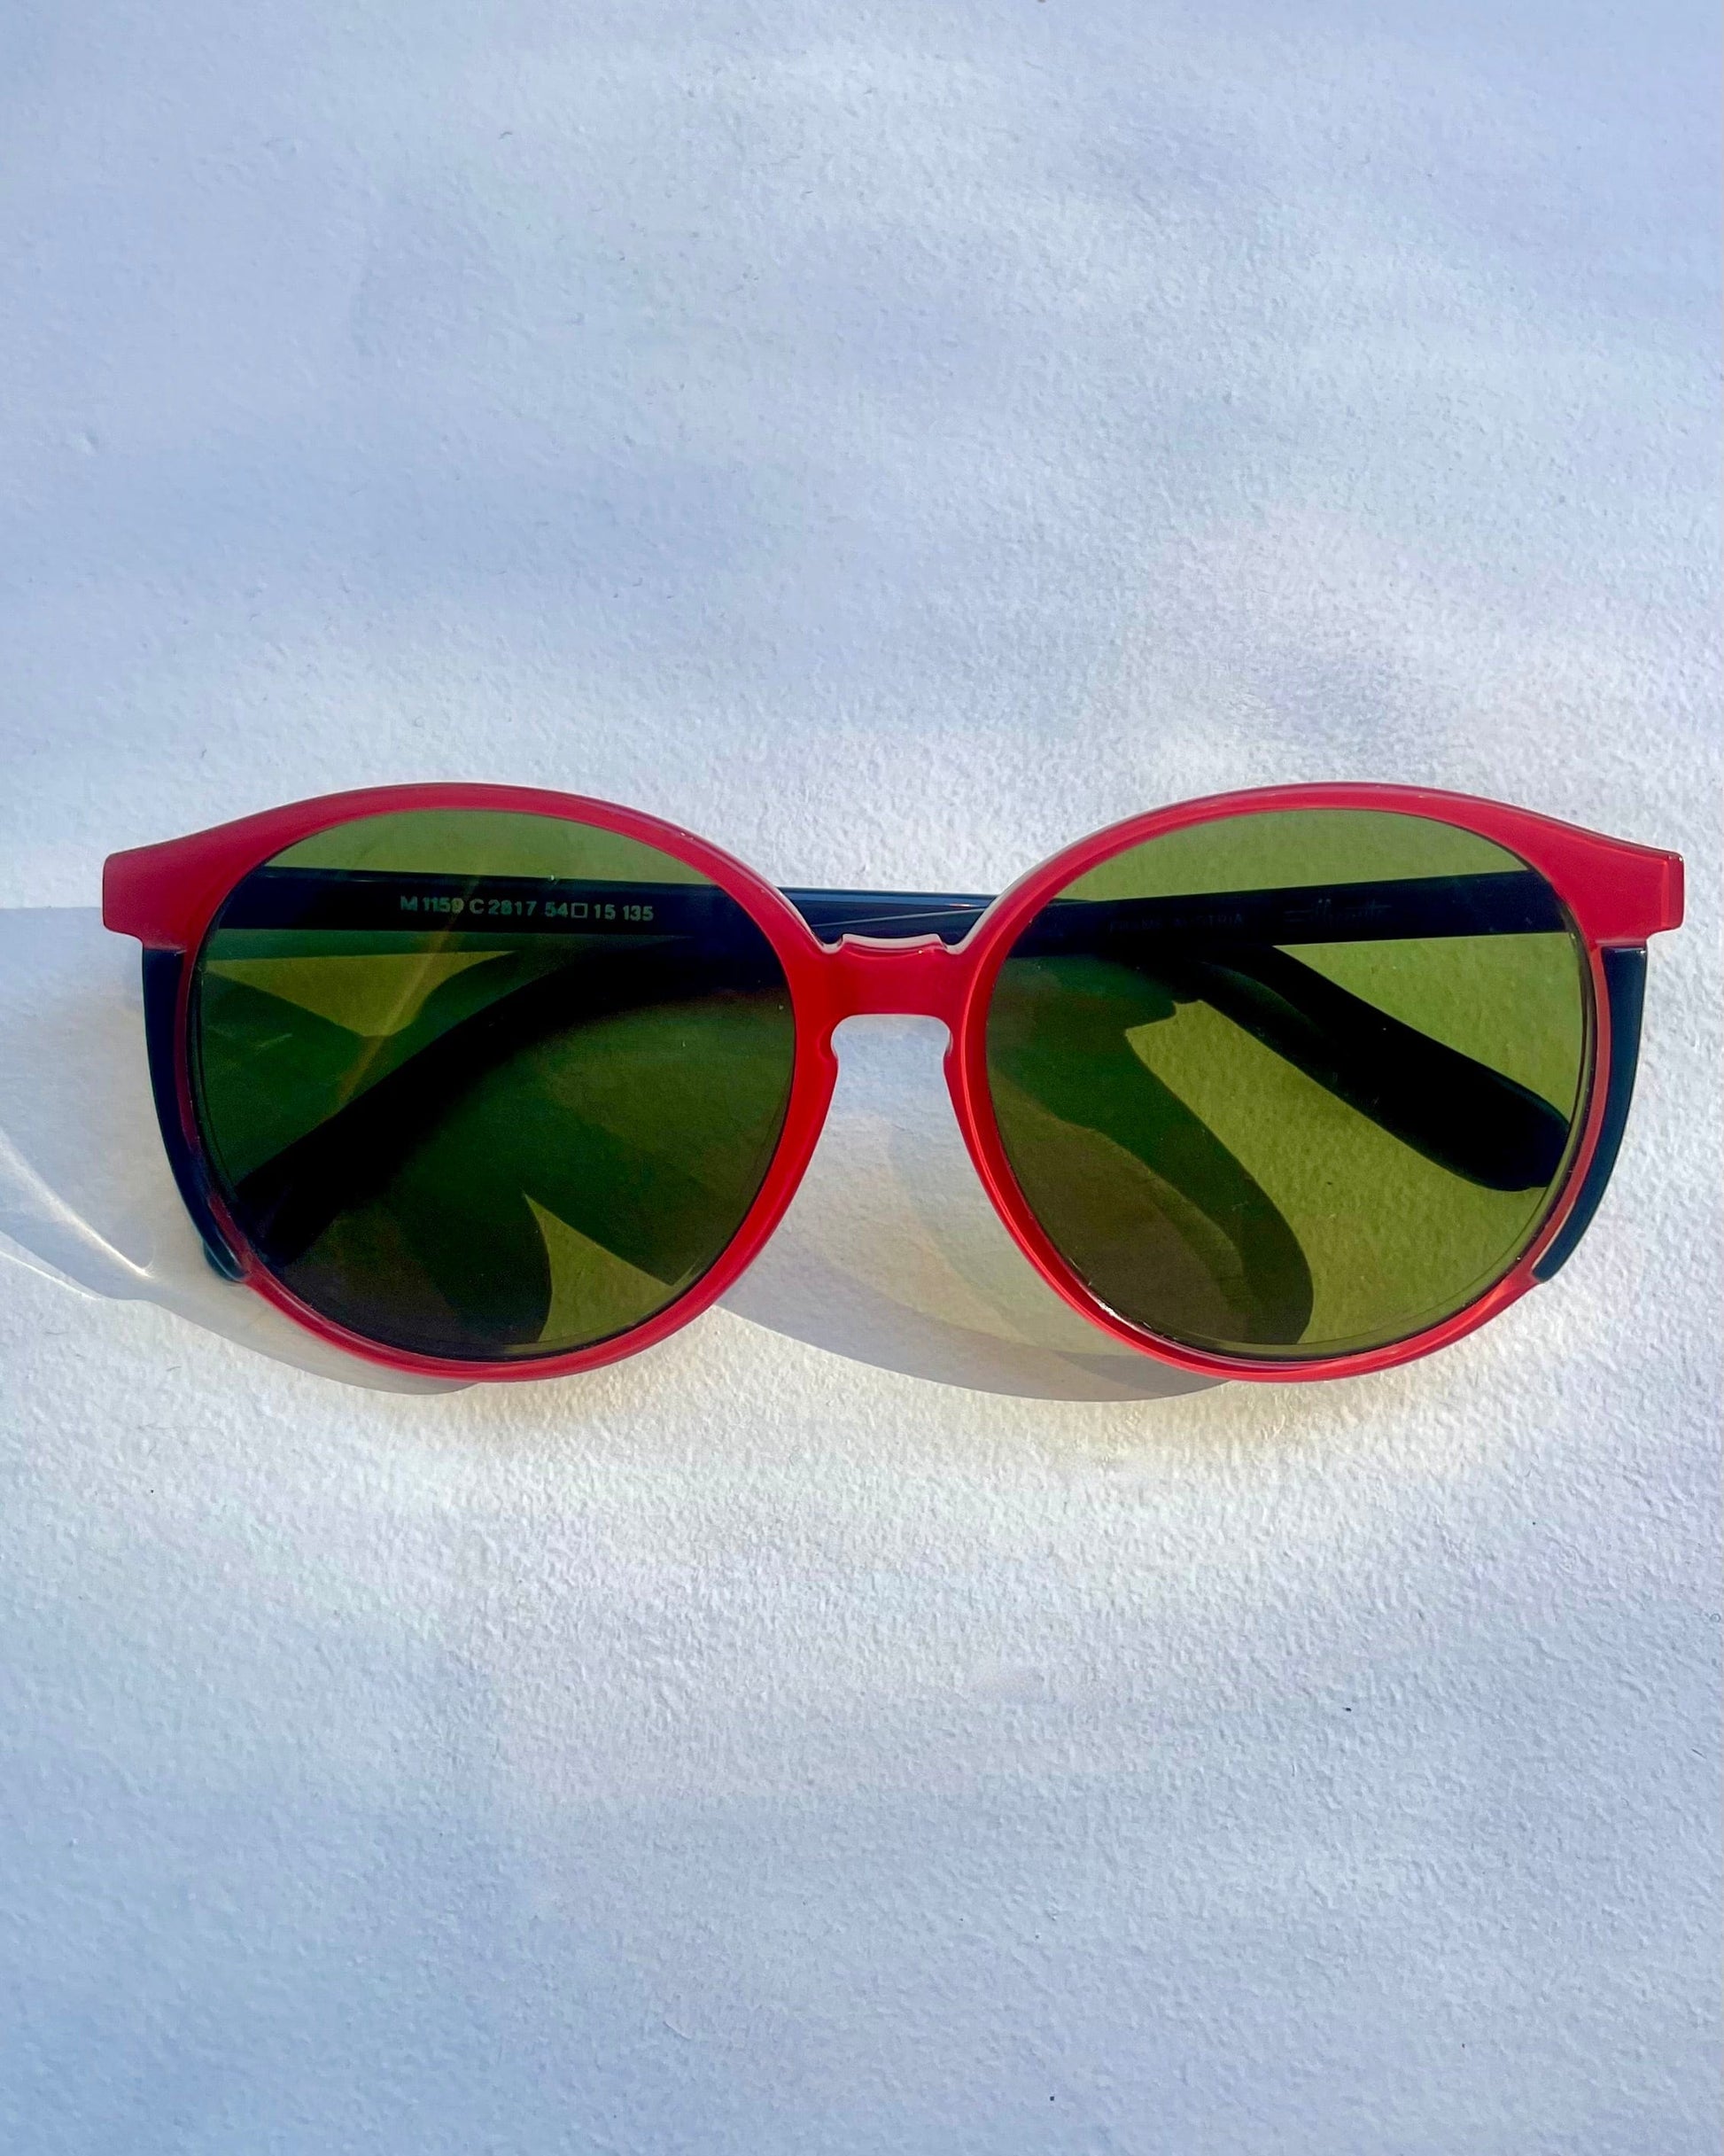 Red/Black Silhouette 80s Vintage Sunglasses Accessories Vintage Shades   